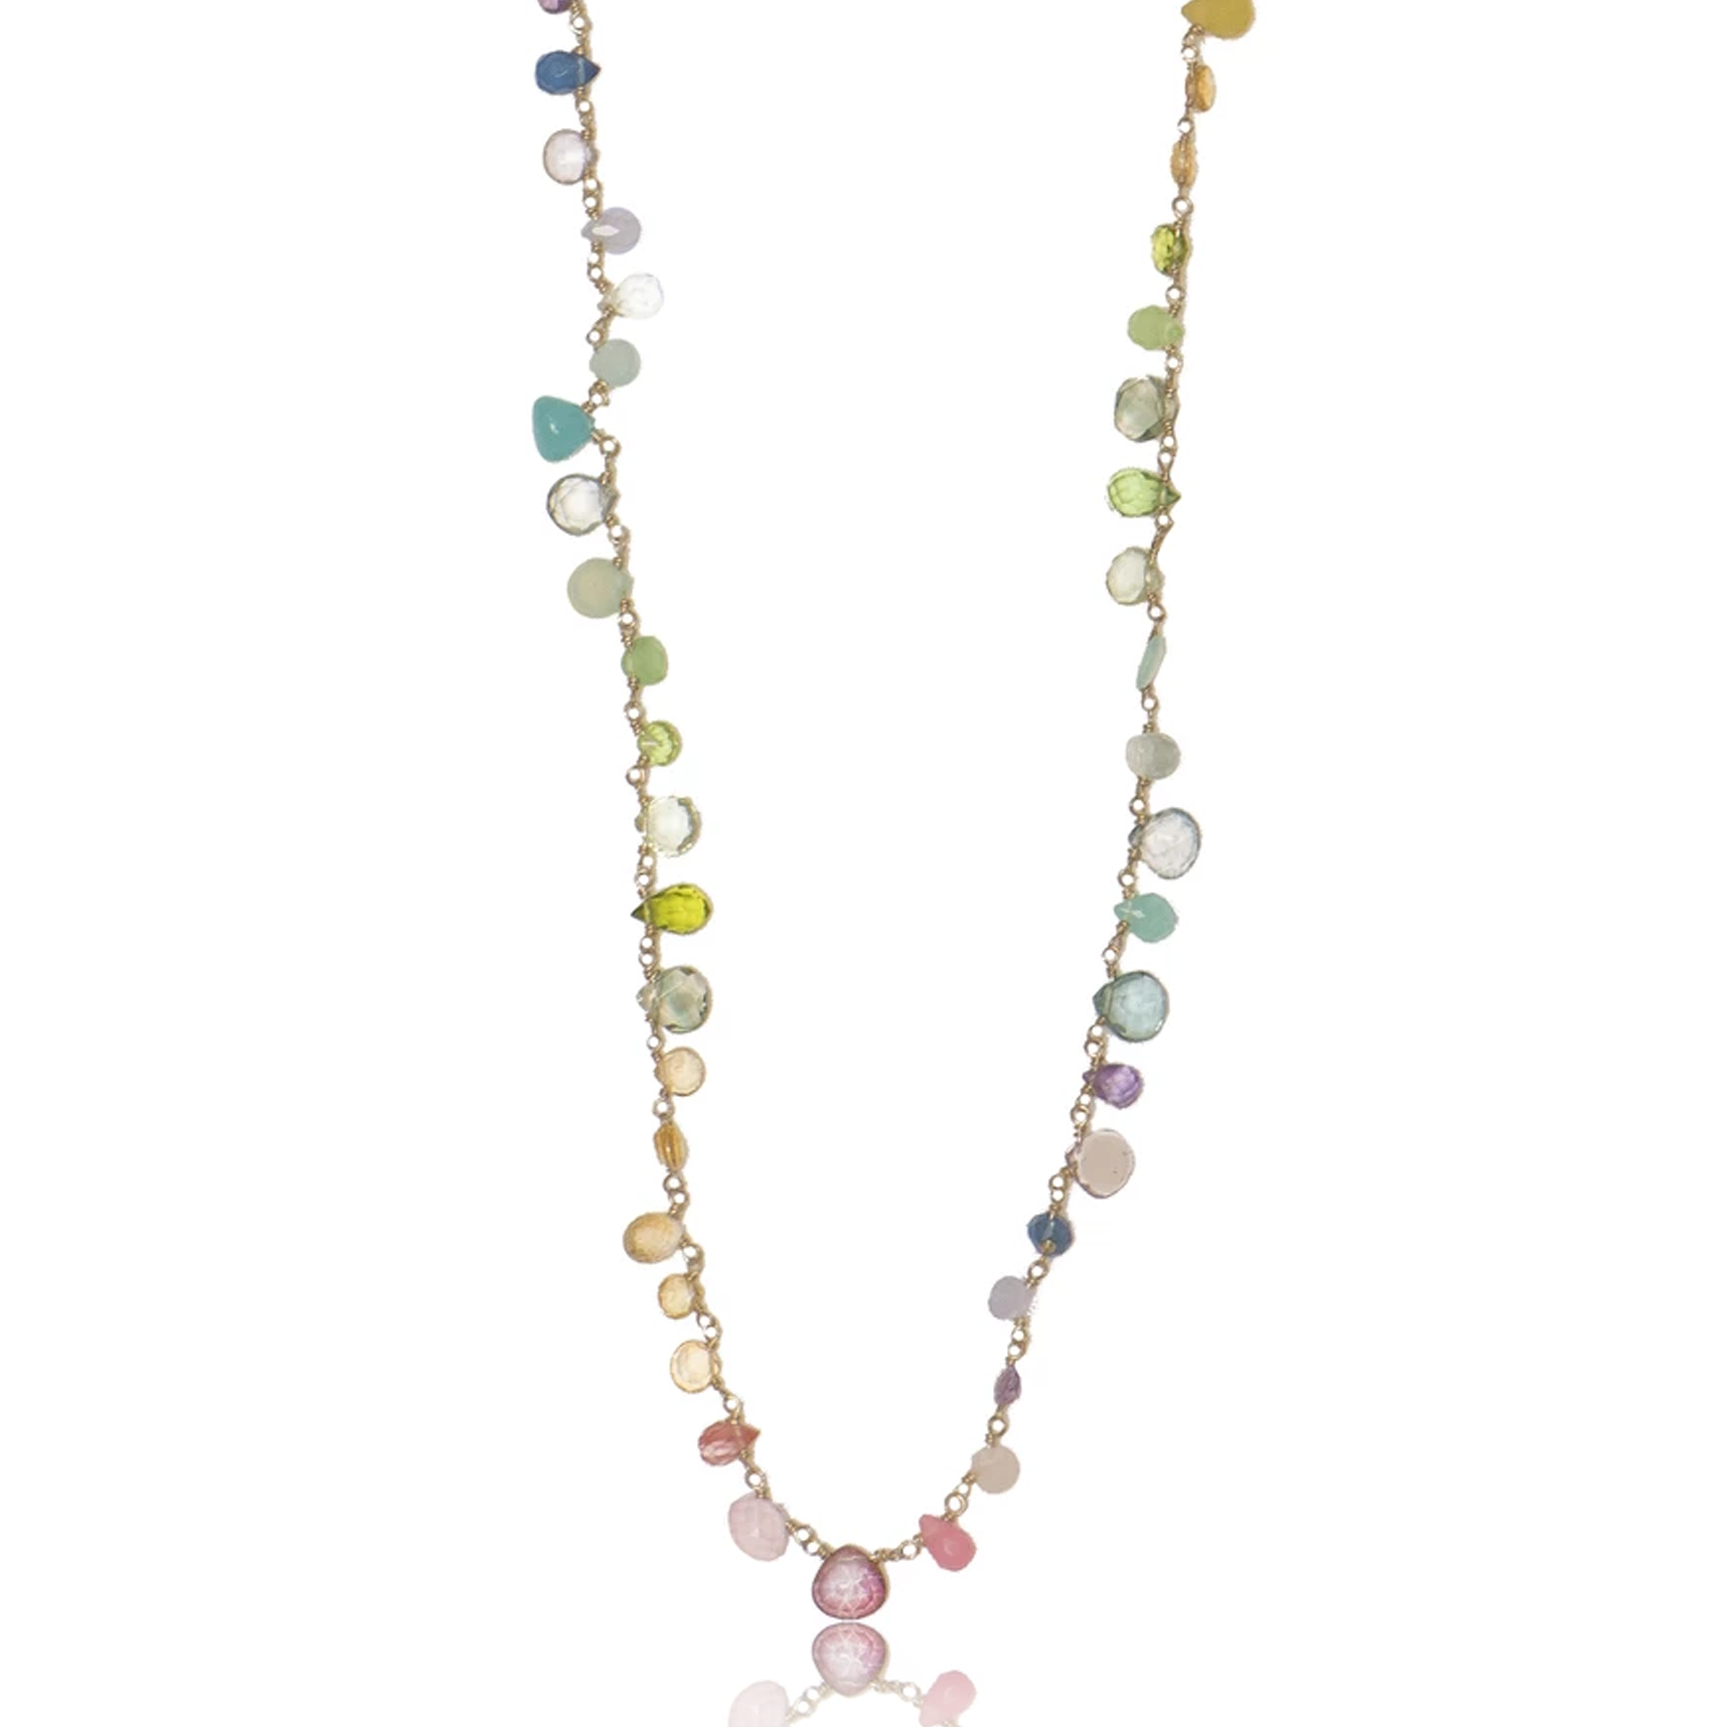 Long Pastel Ombre Necklace with Assorted Pastel Semi Precious Stones